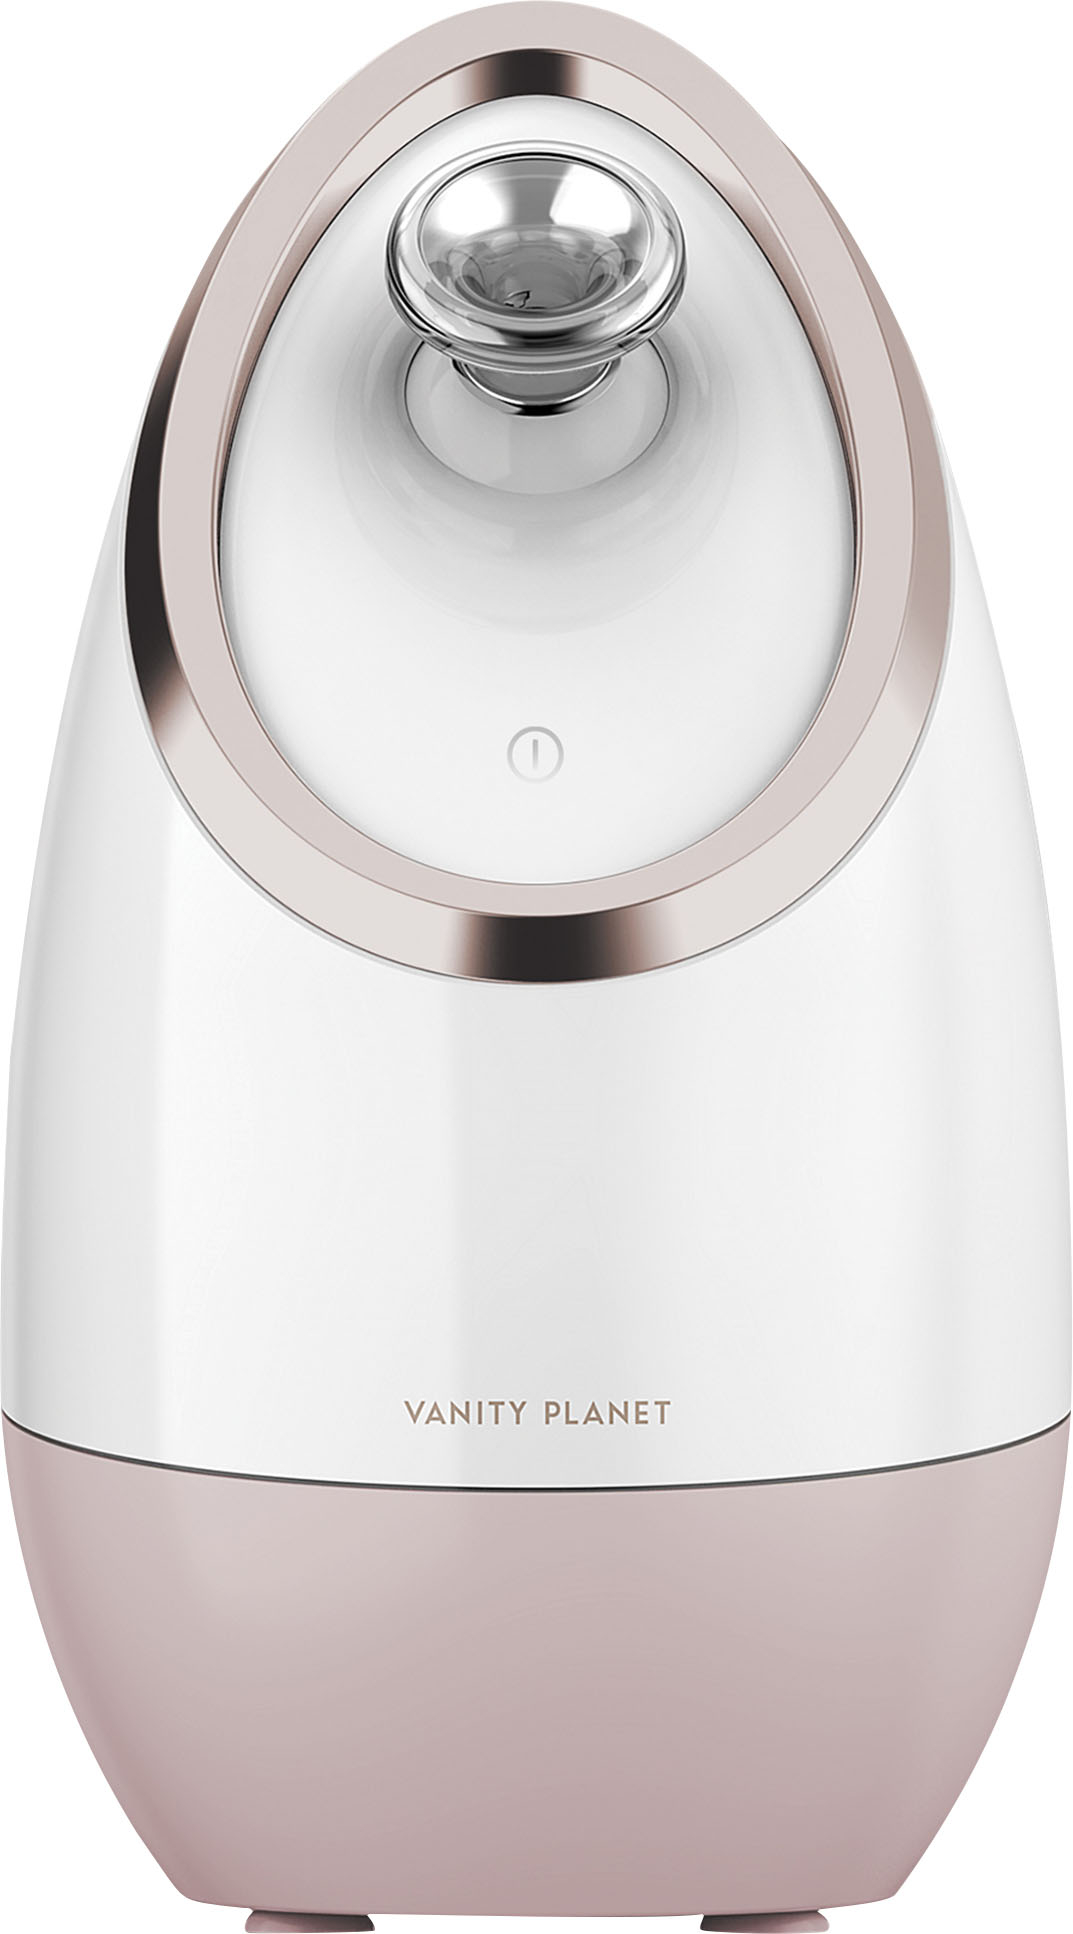 Angle View: Vanity Planet Aira Ionic Facial Steamer for All Skin, Detoxifies, Cleanses & Moisturizes, Rose Gold